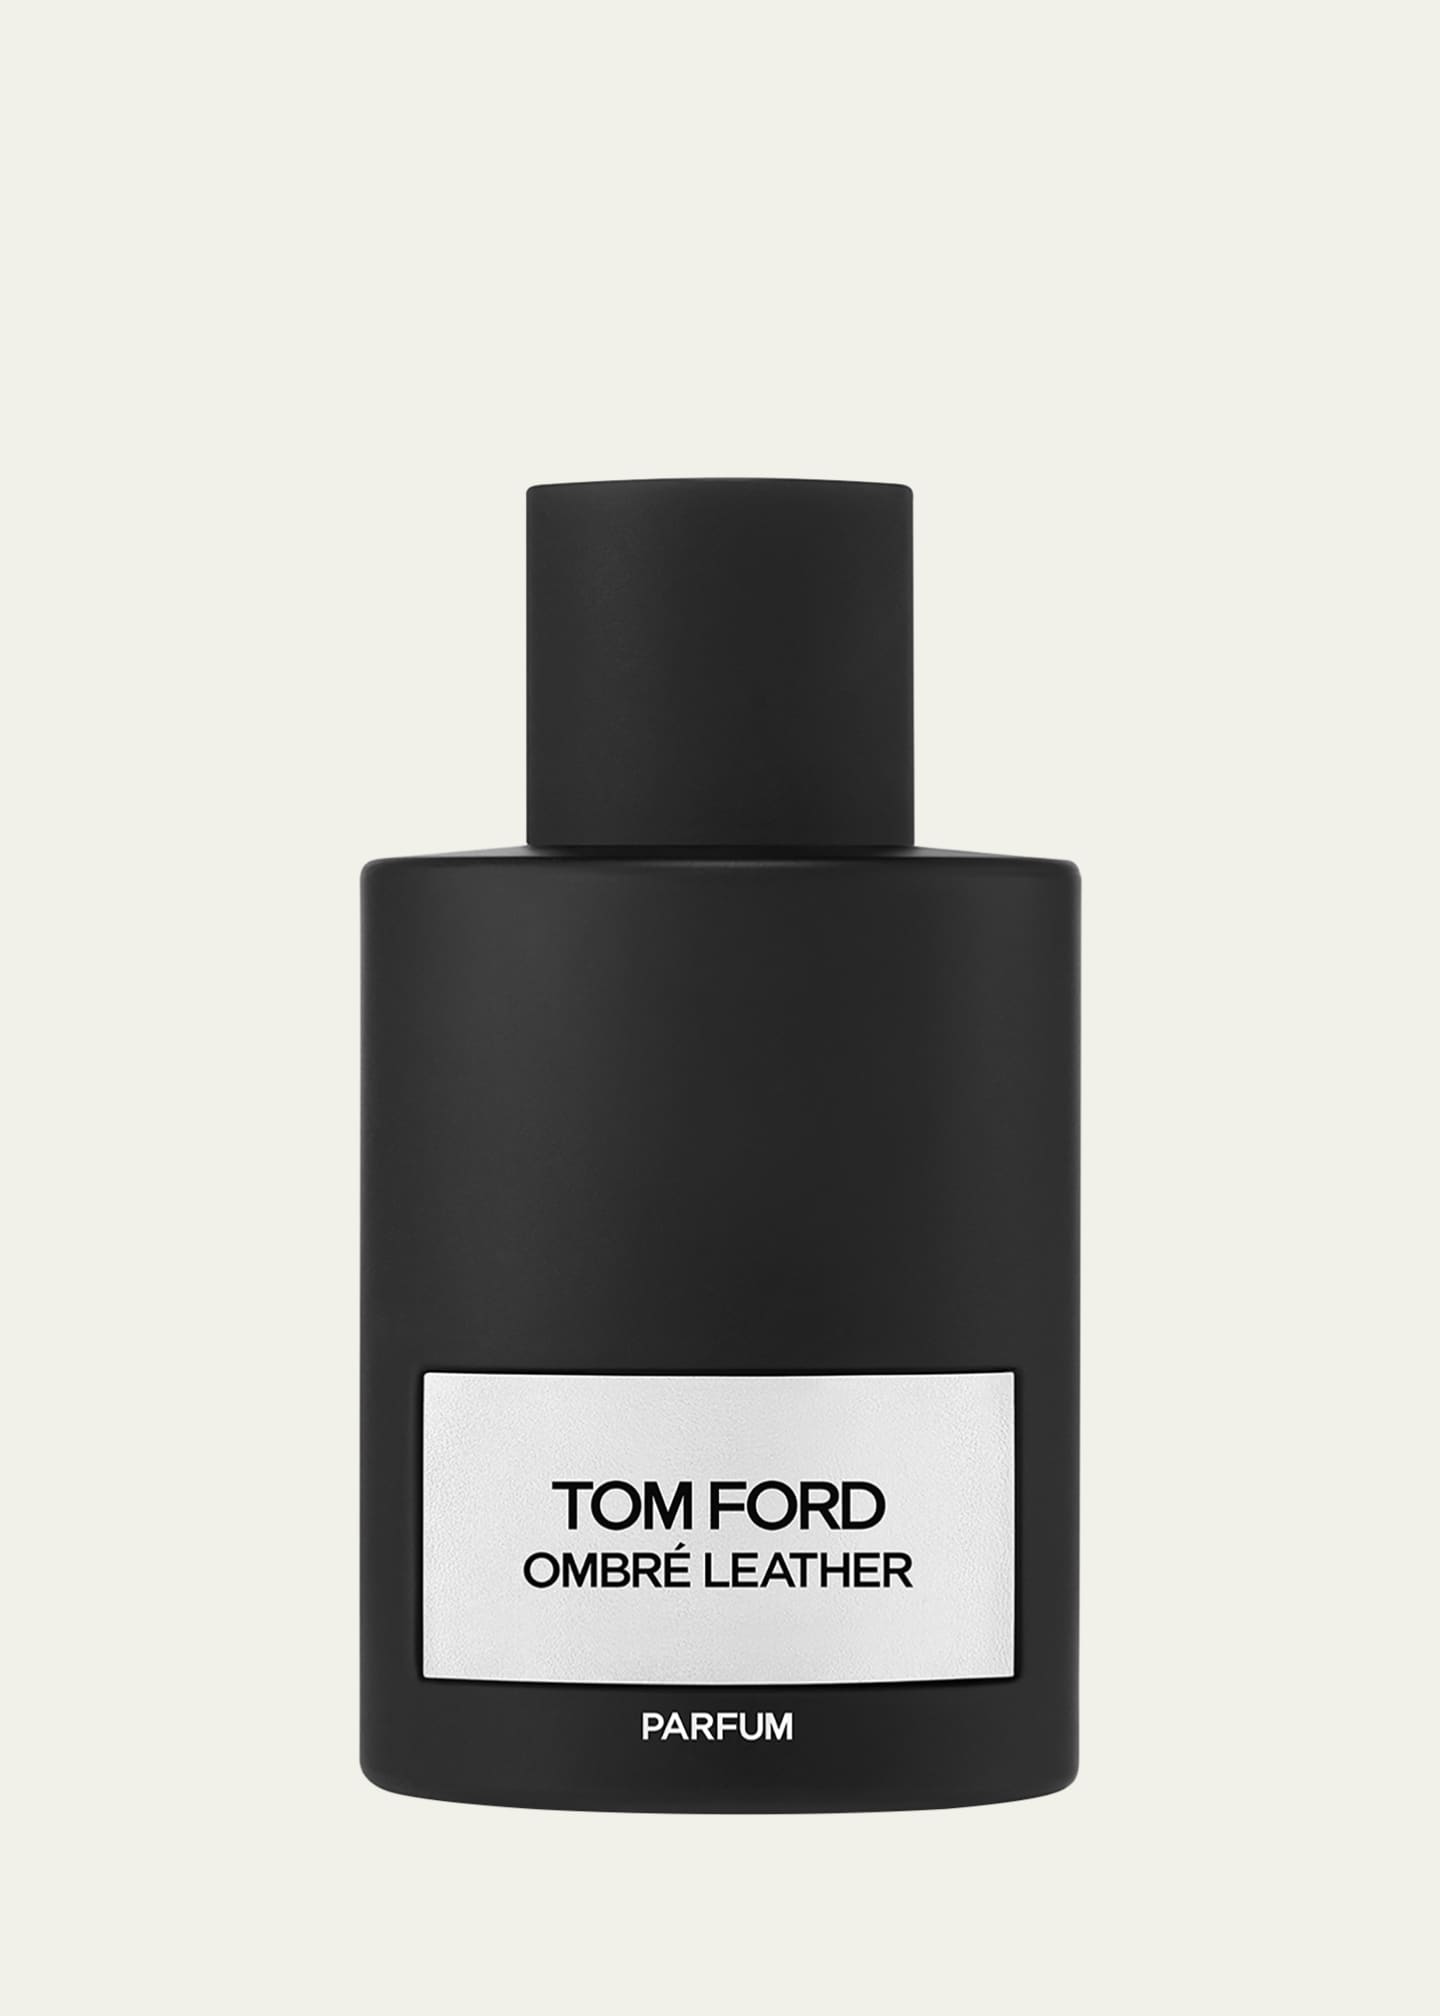 TOM FORD Ombre Leather Parfum (3.4 oz)